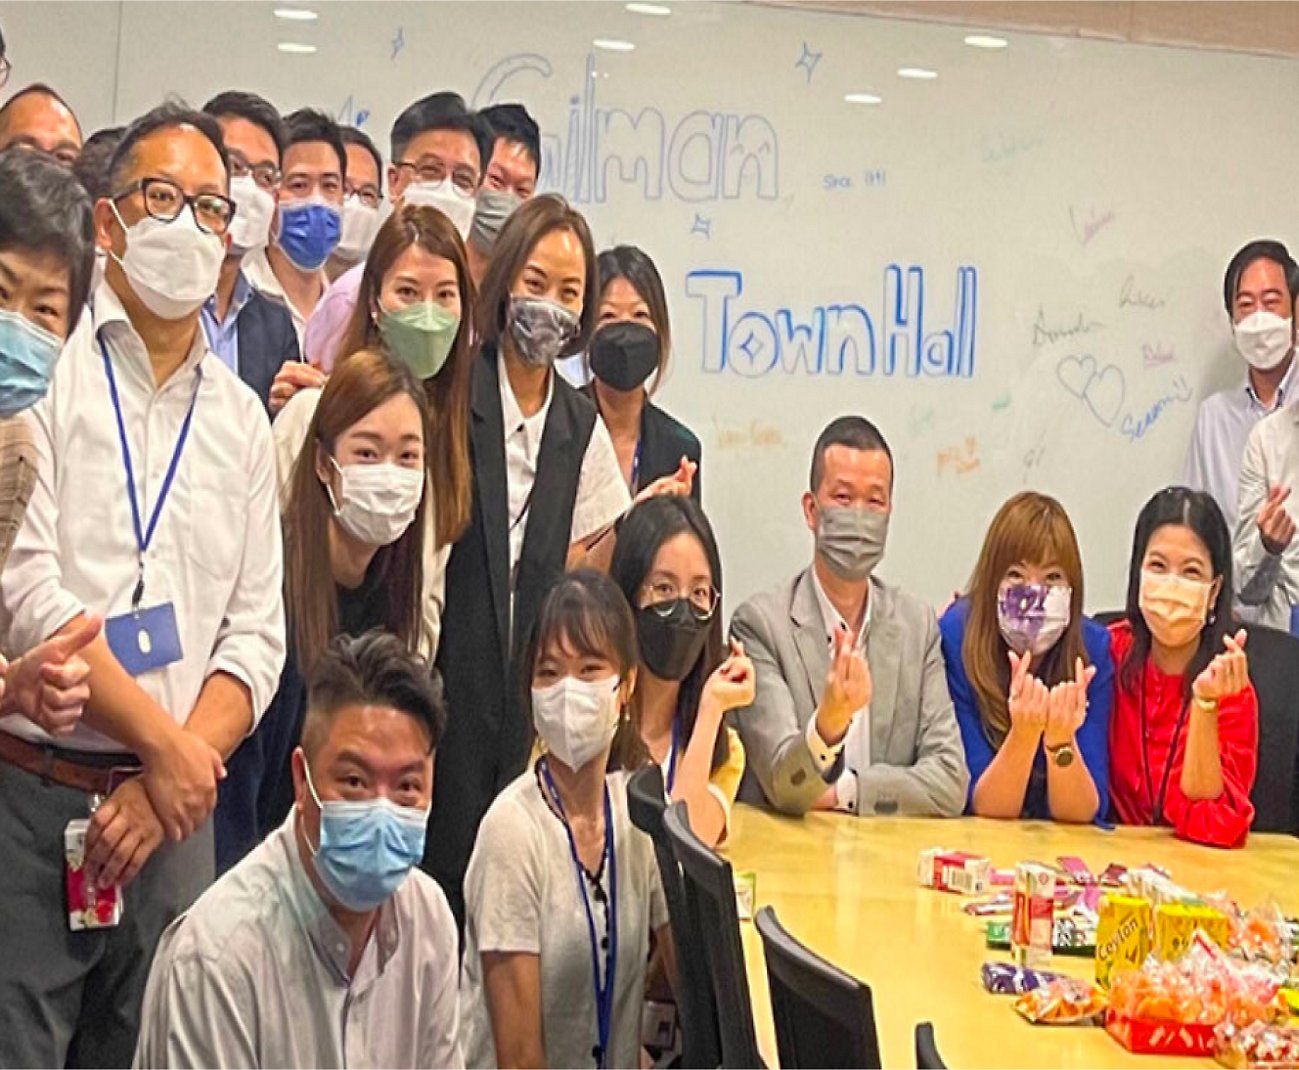 A group of people posing for a photo wearing face masks.